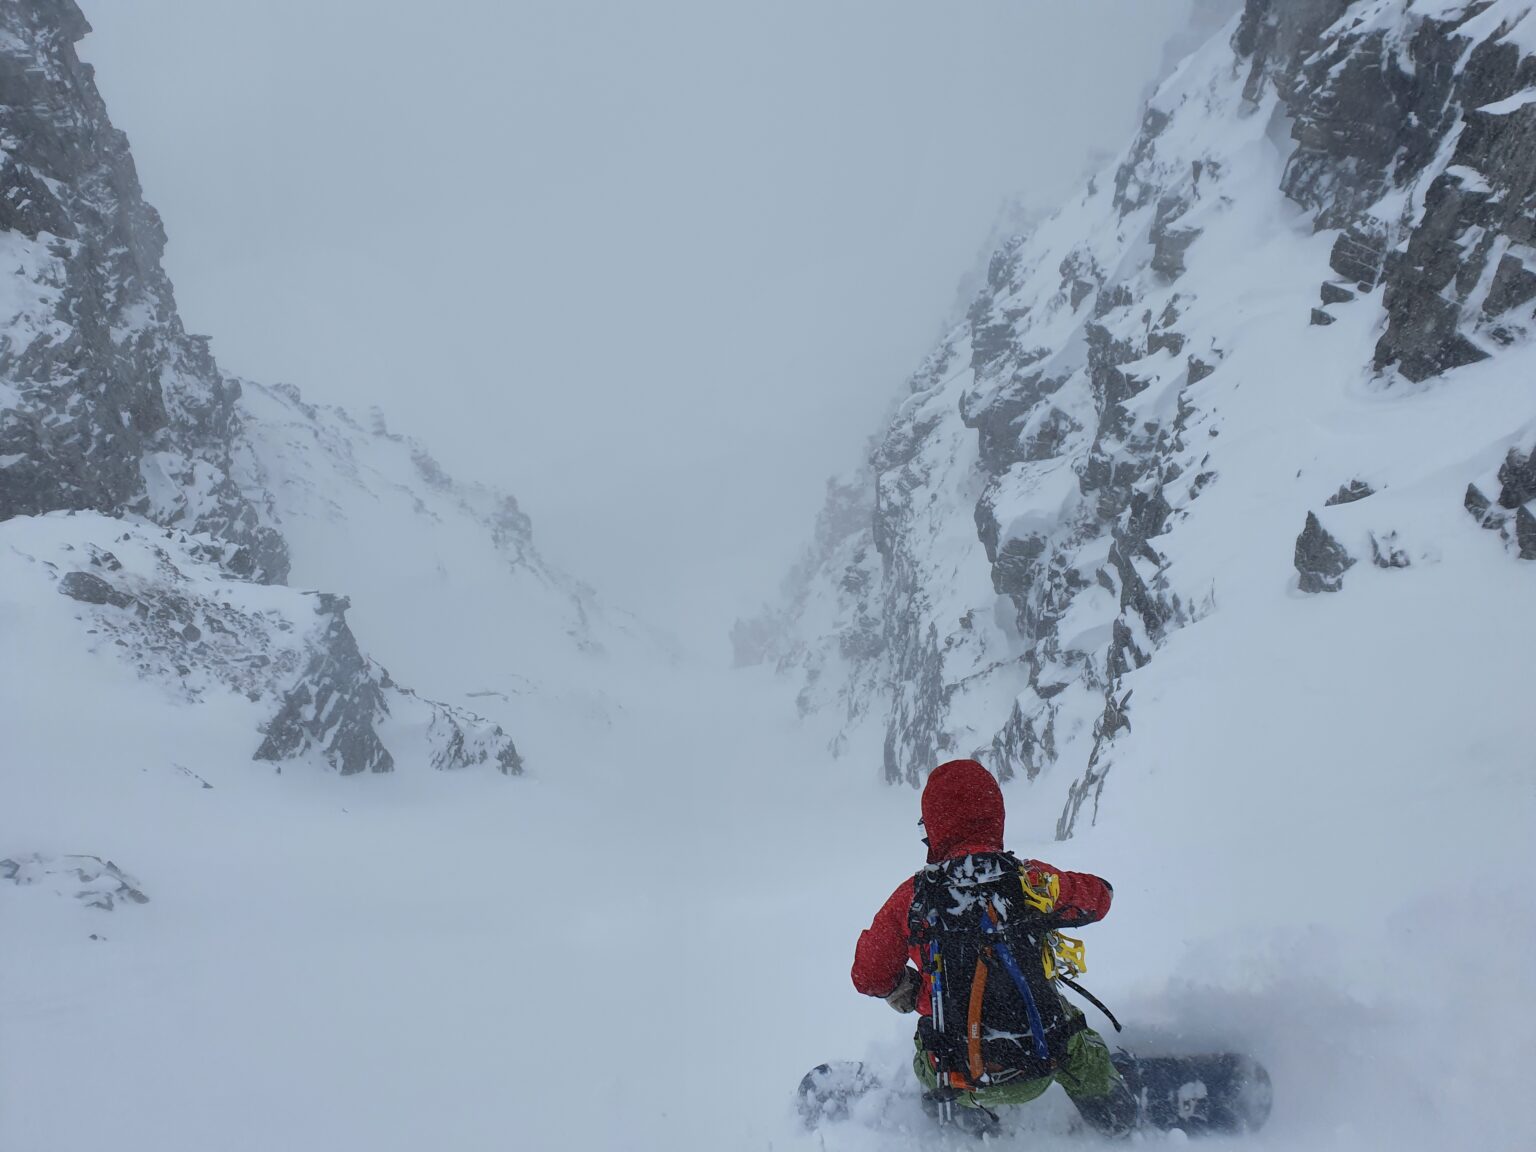 Snowboarding down the West Couloir of Rostafjellet in the Tamokdalen Backcountry